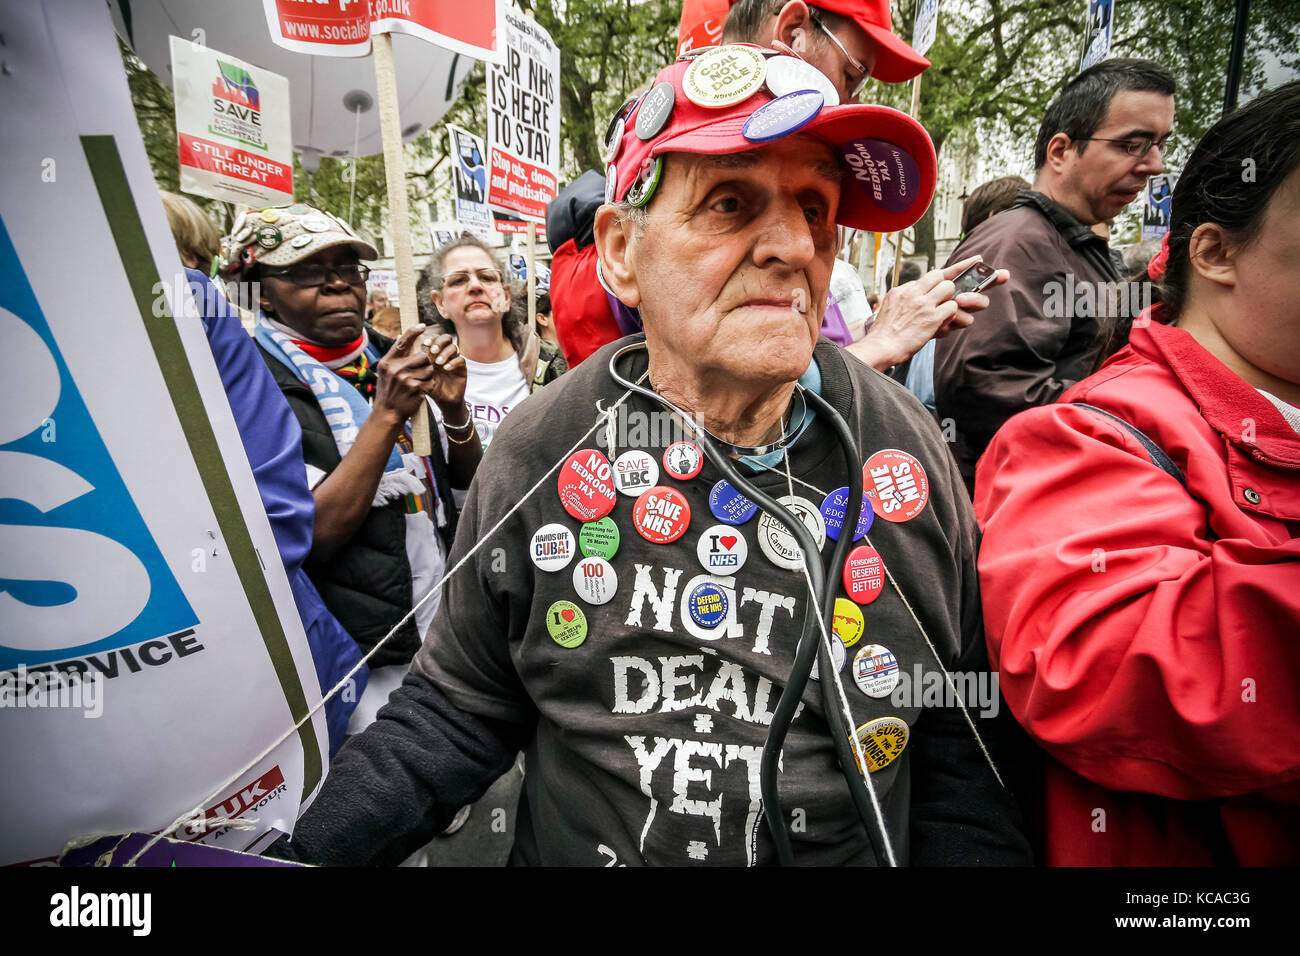 Protesters march and rally over NHS reforms. London, UK. Stock Photo